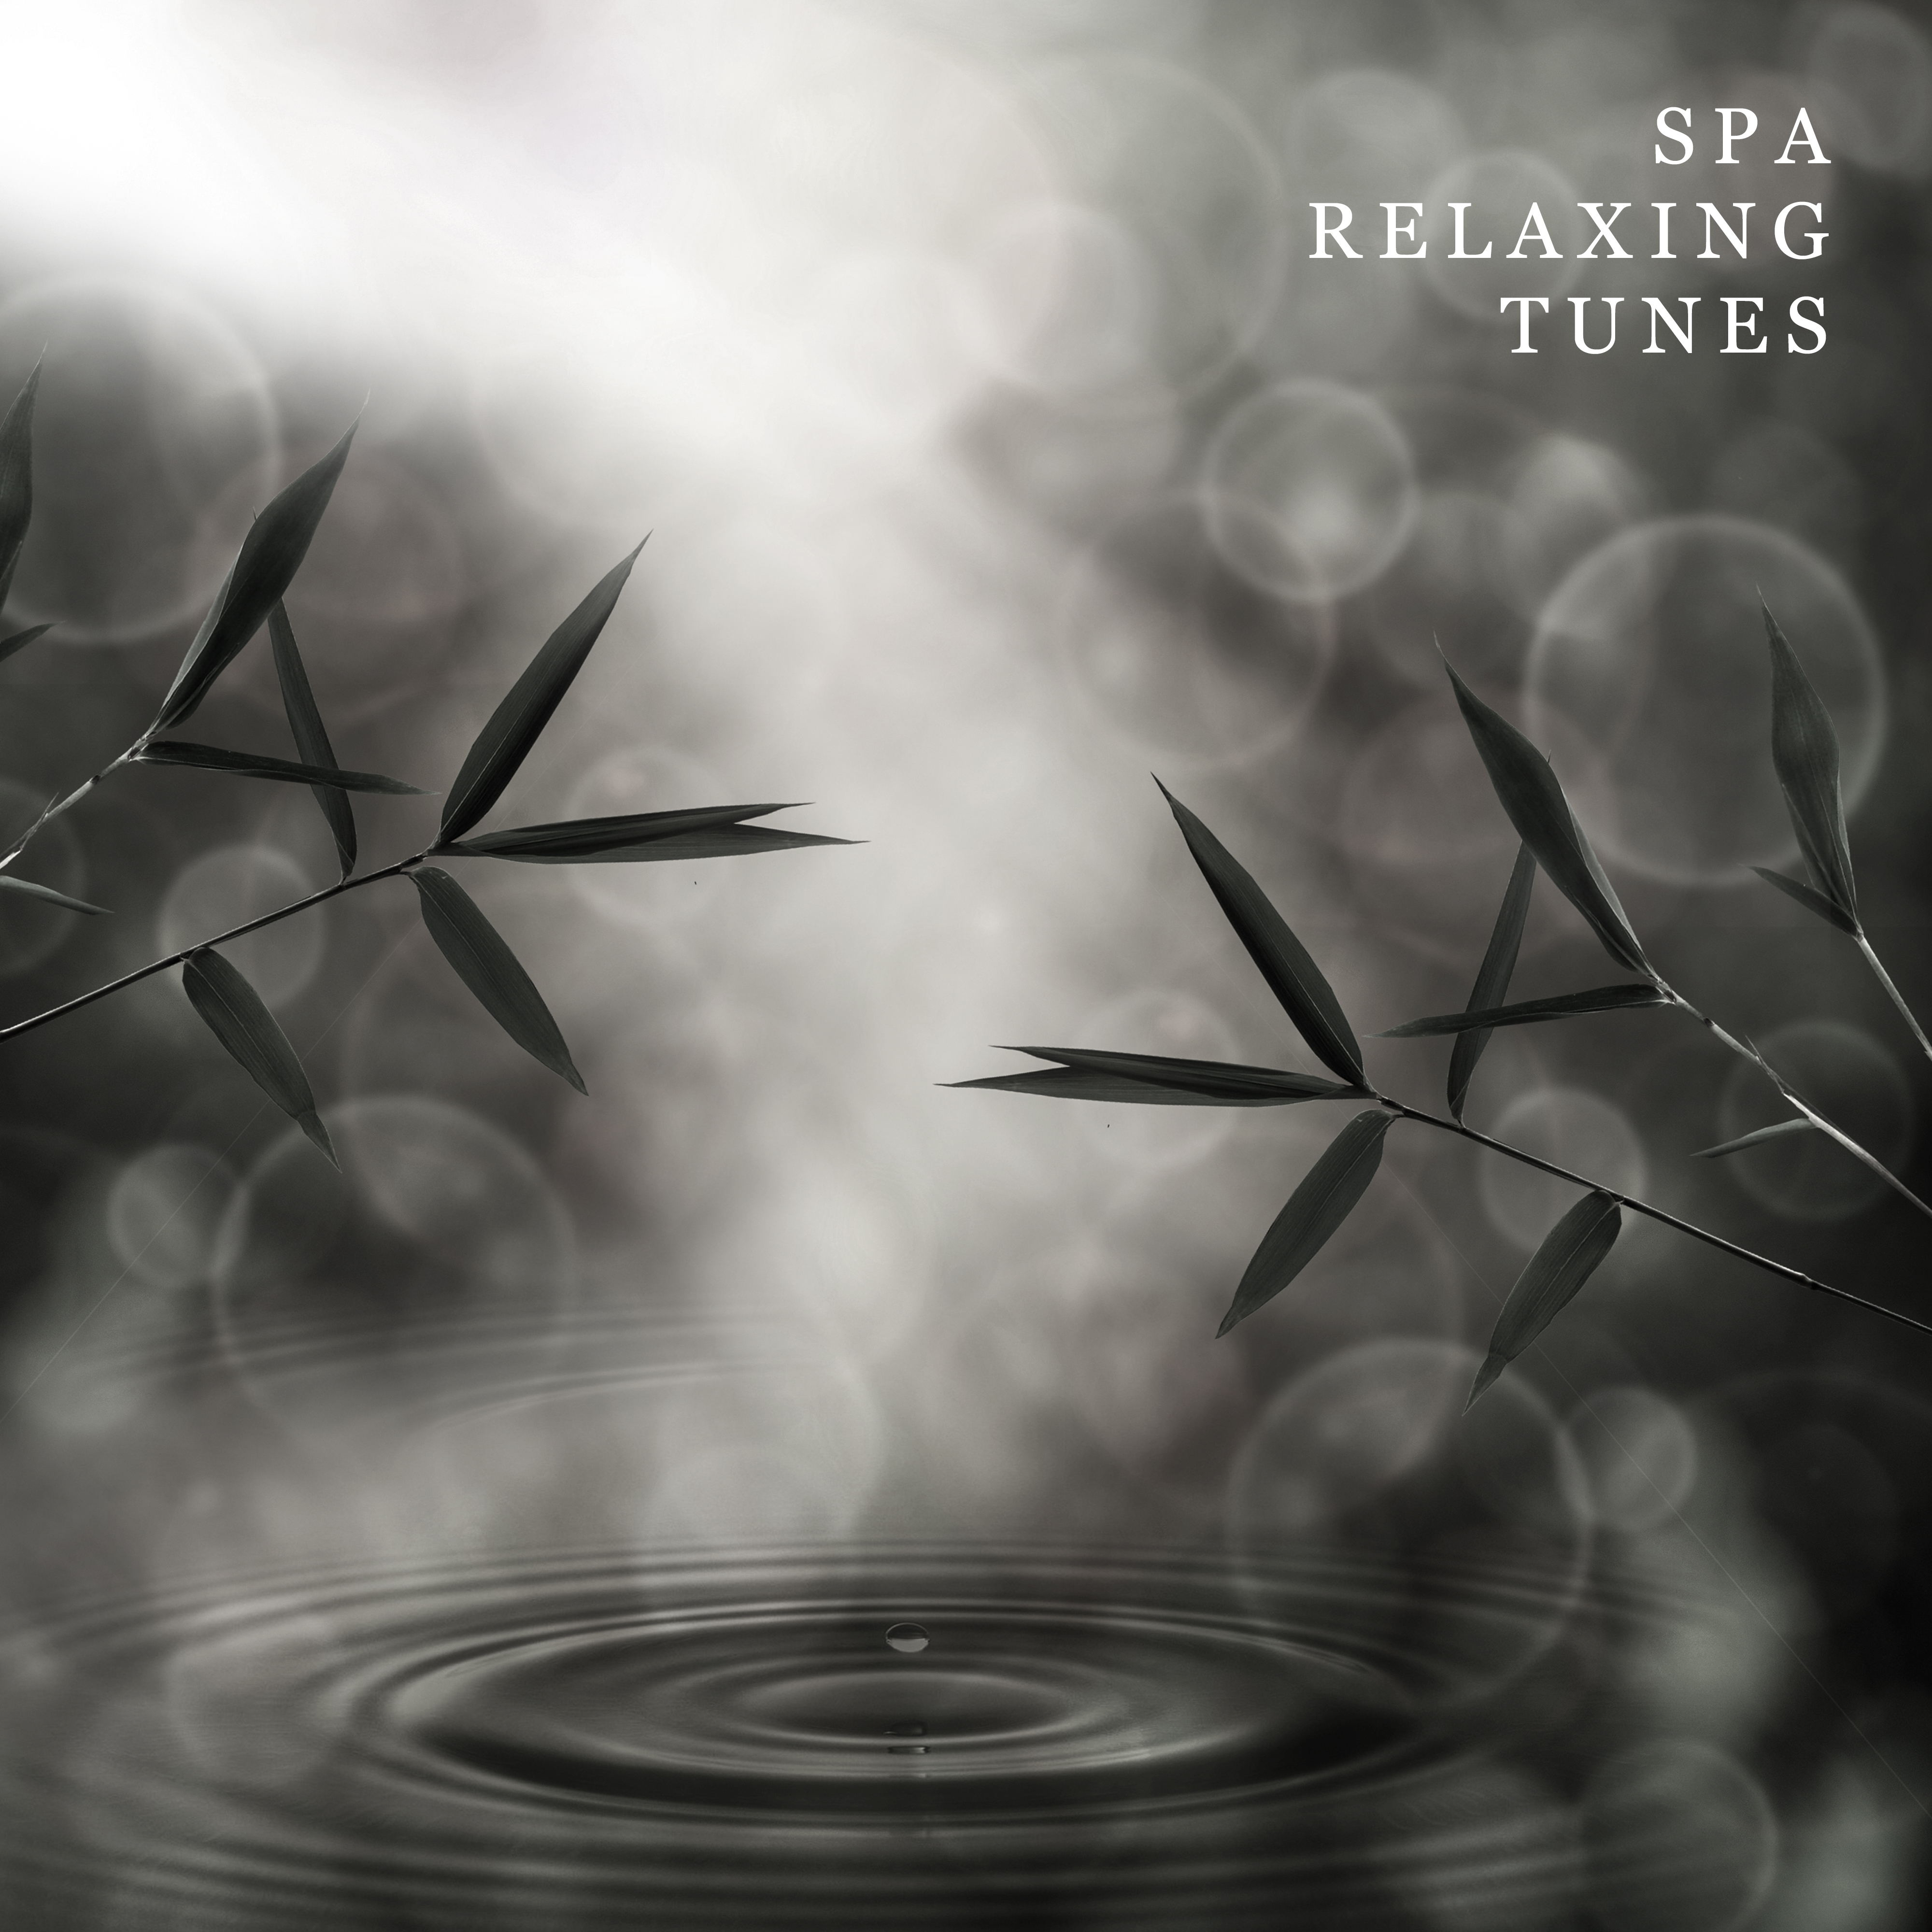 Spa Relaxing Tunes